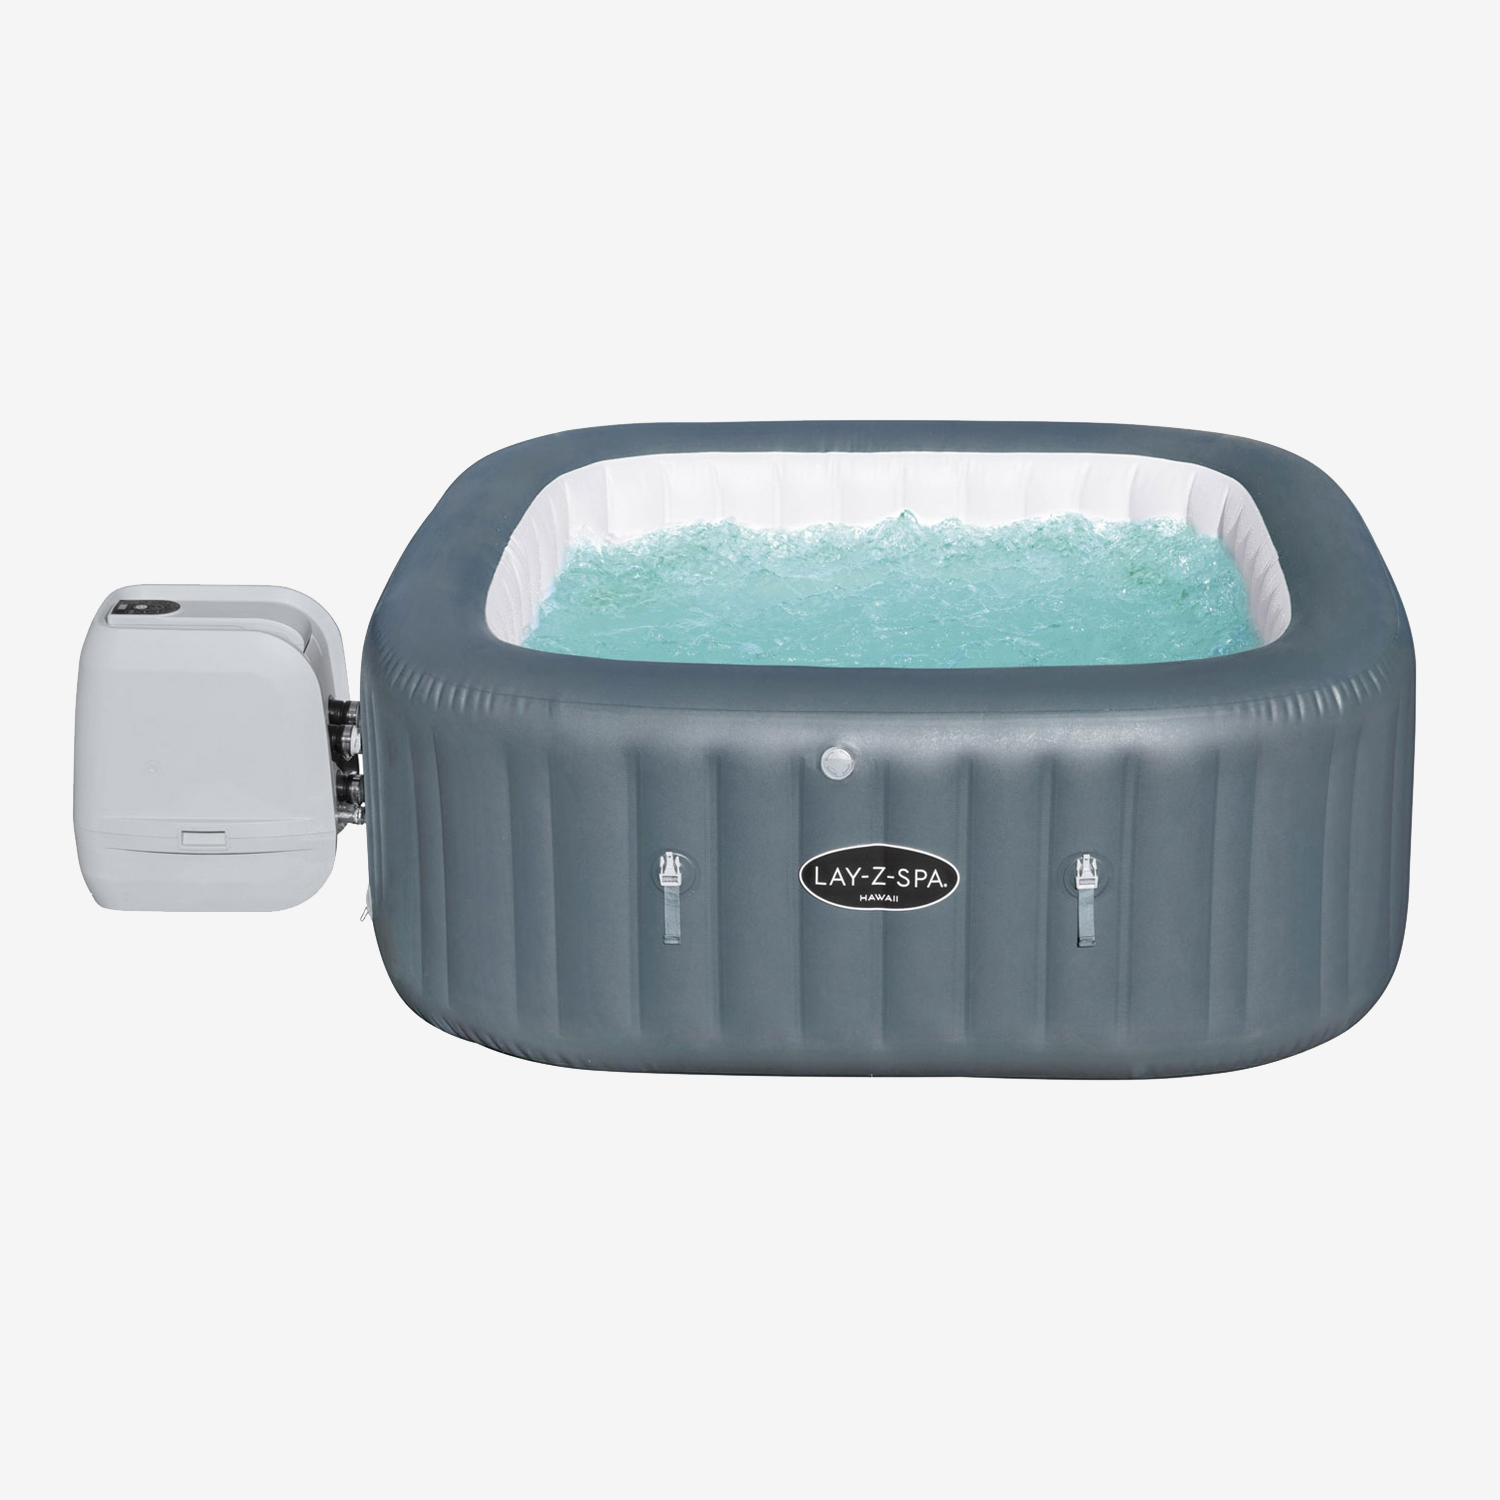 Spa Hinchable Bestway Lay-z-spa Hydrojet Pro 6 Personas - gris - 